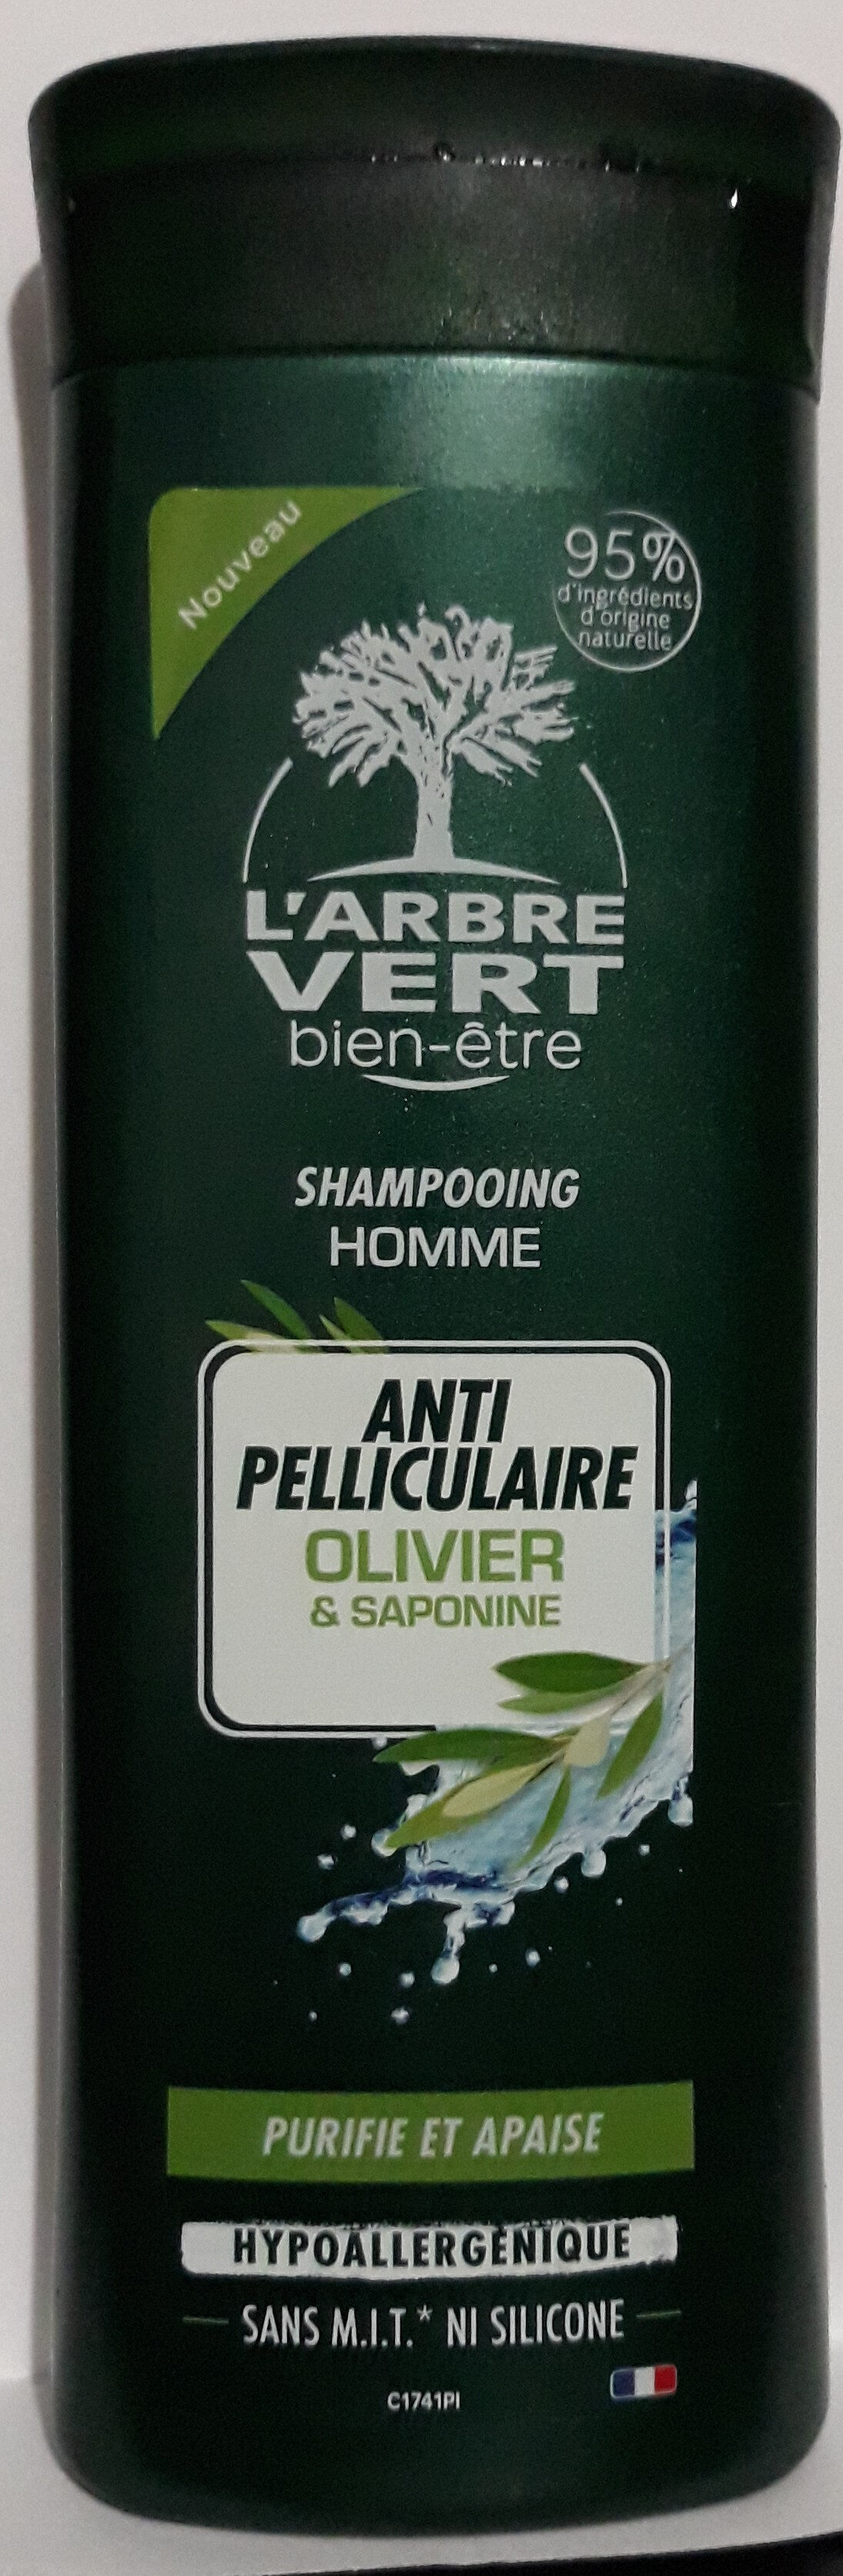 shampooing homme anti pelliculaire olivier & saponine - Produkto - fr